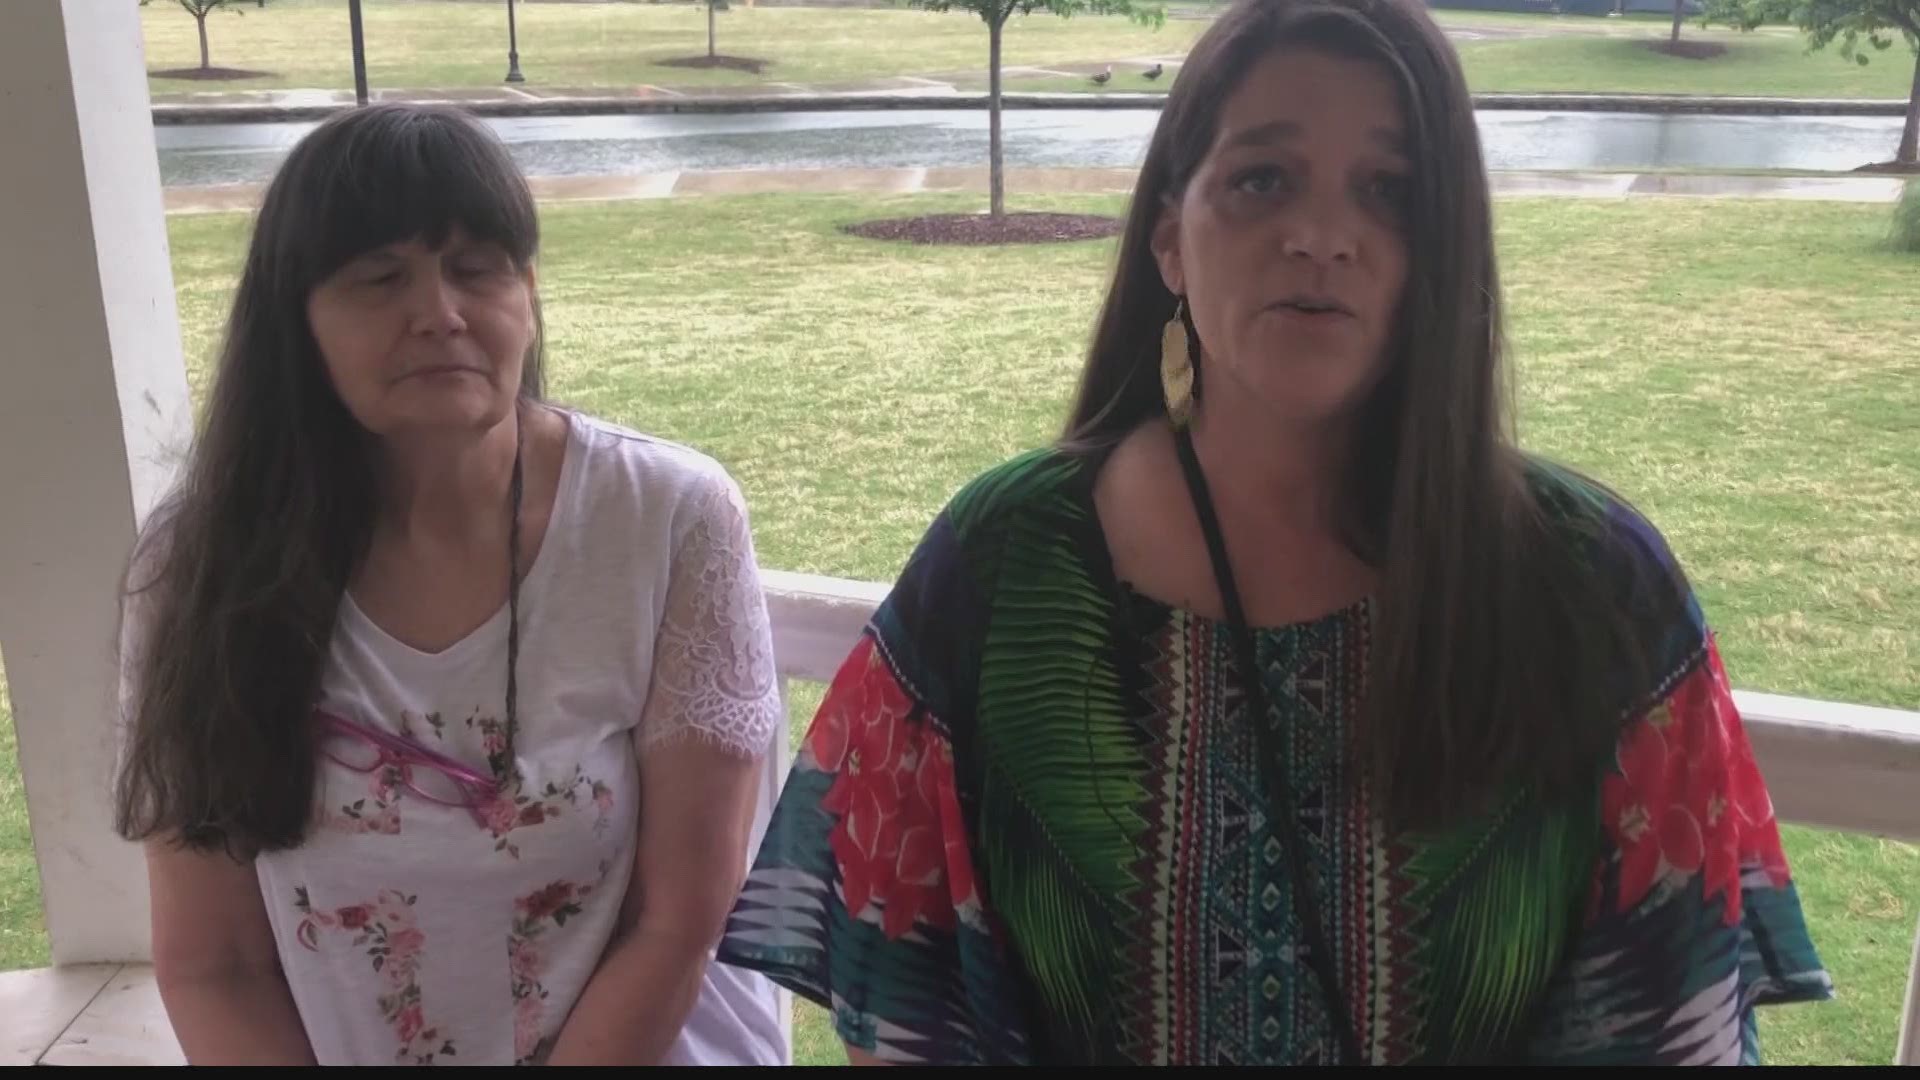 A mother and daughter in the Tennessee Valley share how they spent Mother's Day last year in comparison to this year.